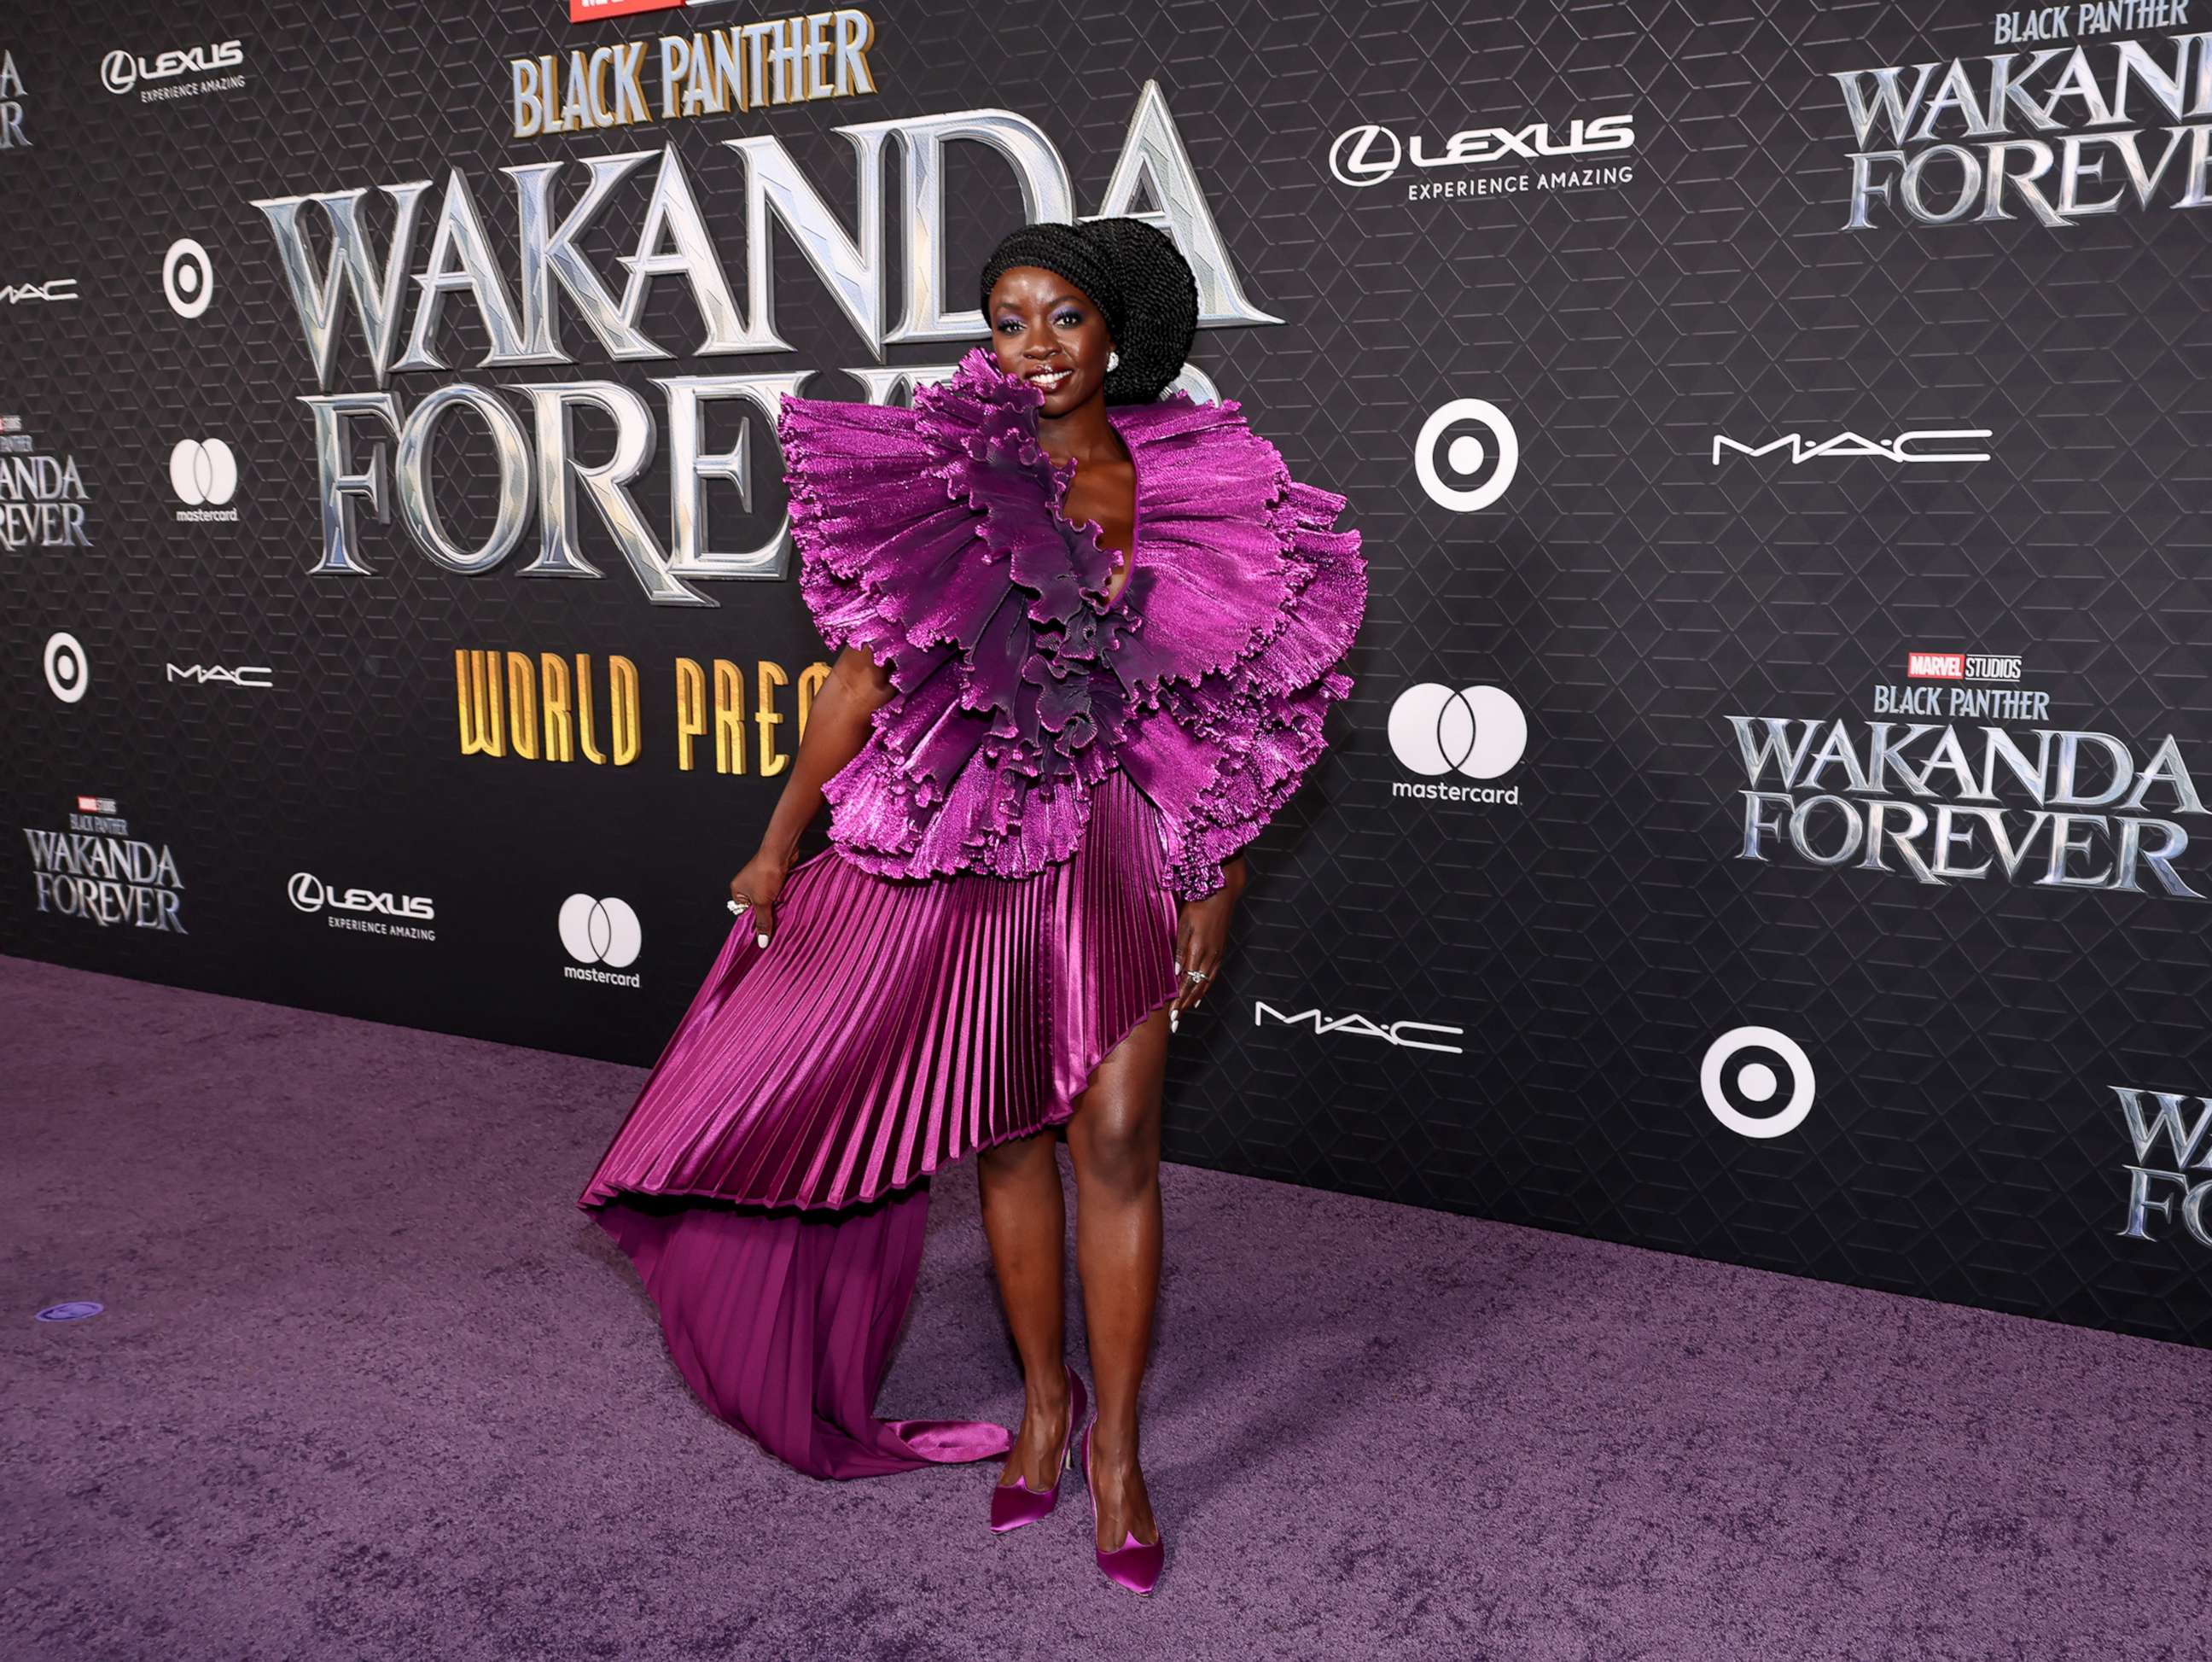 PHOTO: Danai Gurira attends Marvel Studios' "Black Panther: Wakanda Forever" premiere at Dolby Theatre on Oct. 26, 2022 in Hollywood, Calif.